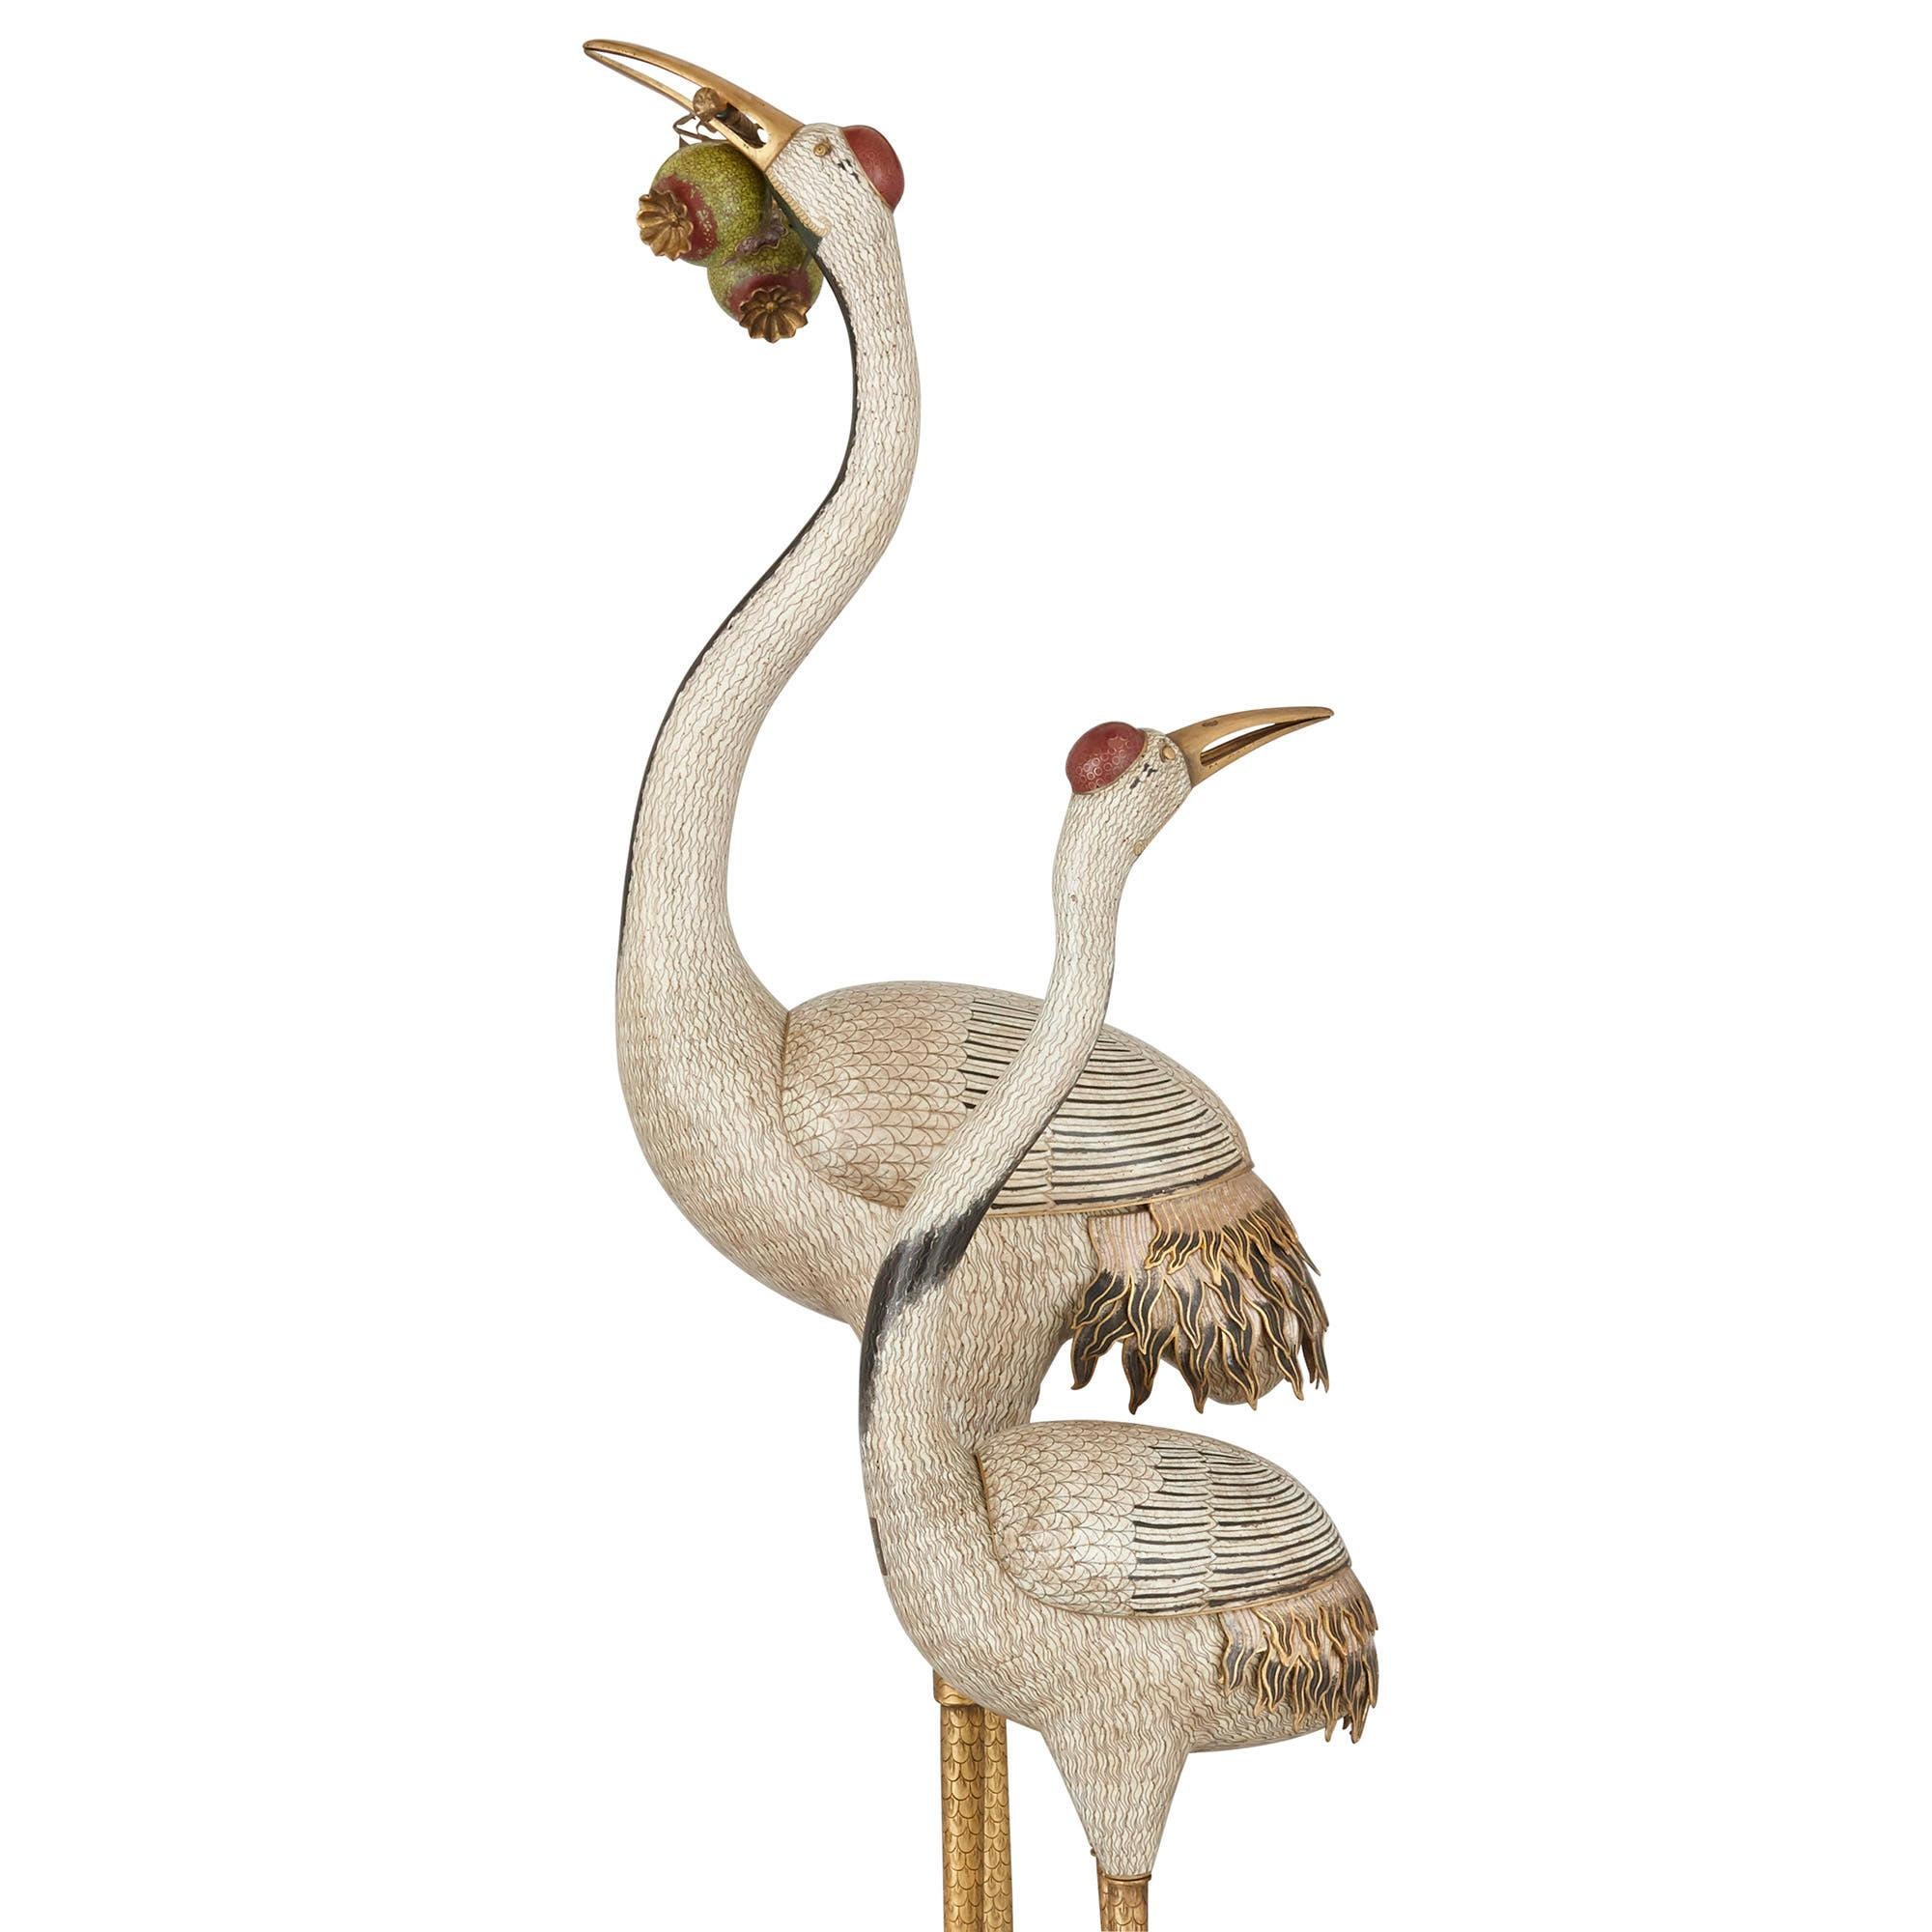 Two massive late Qing cloisonné enamel models of cranes
Chinese, circa 1900
Measures: Height 187cm, width 52cm, depth 50cm

These extraordinary Chinese cloisonné enamel models of cranes are finely and realistically modelled and strikingly large,